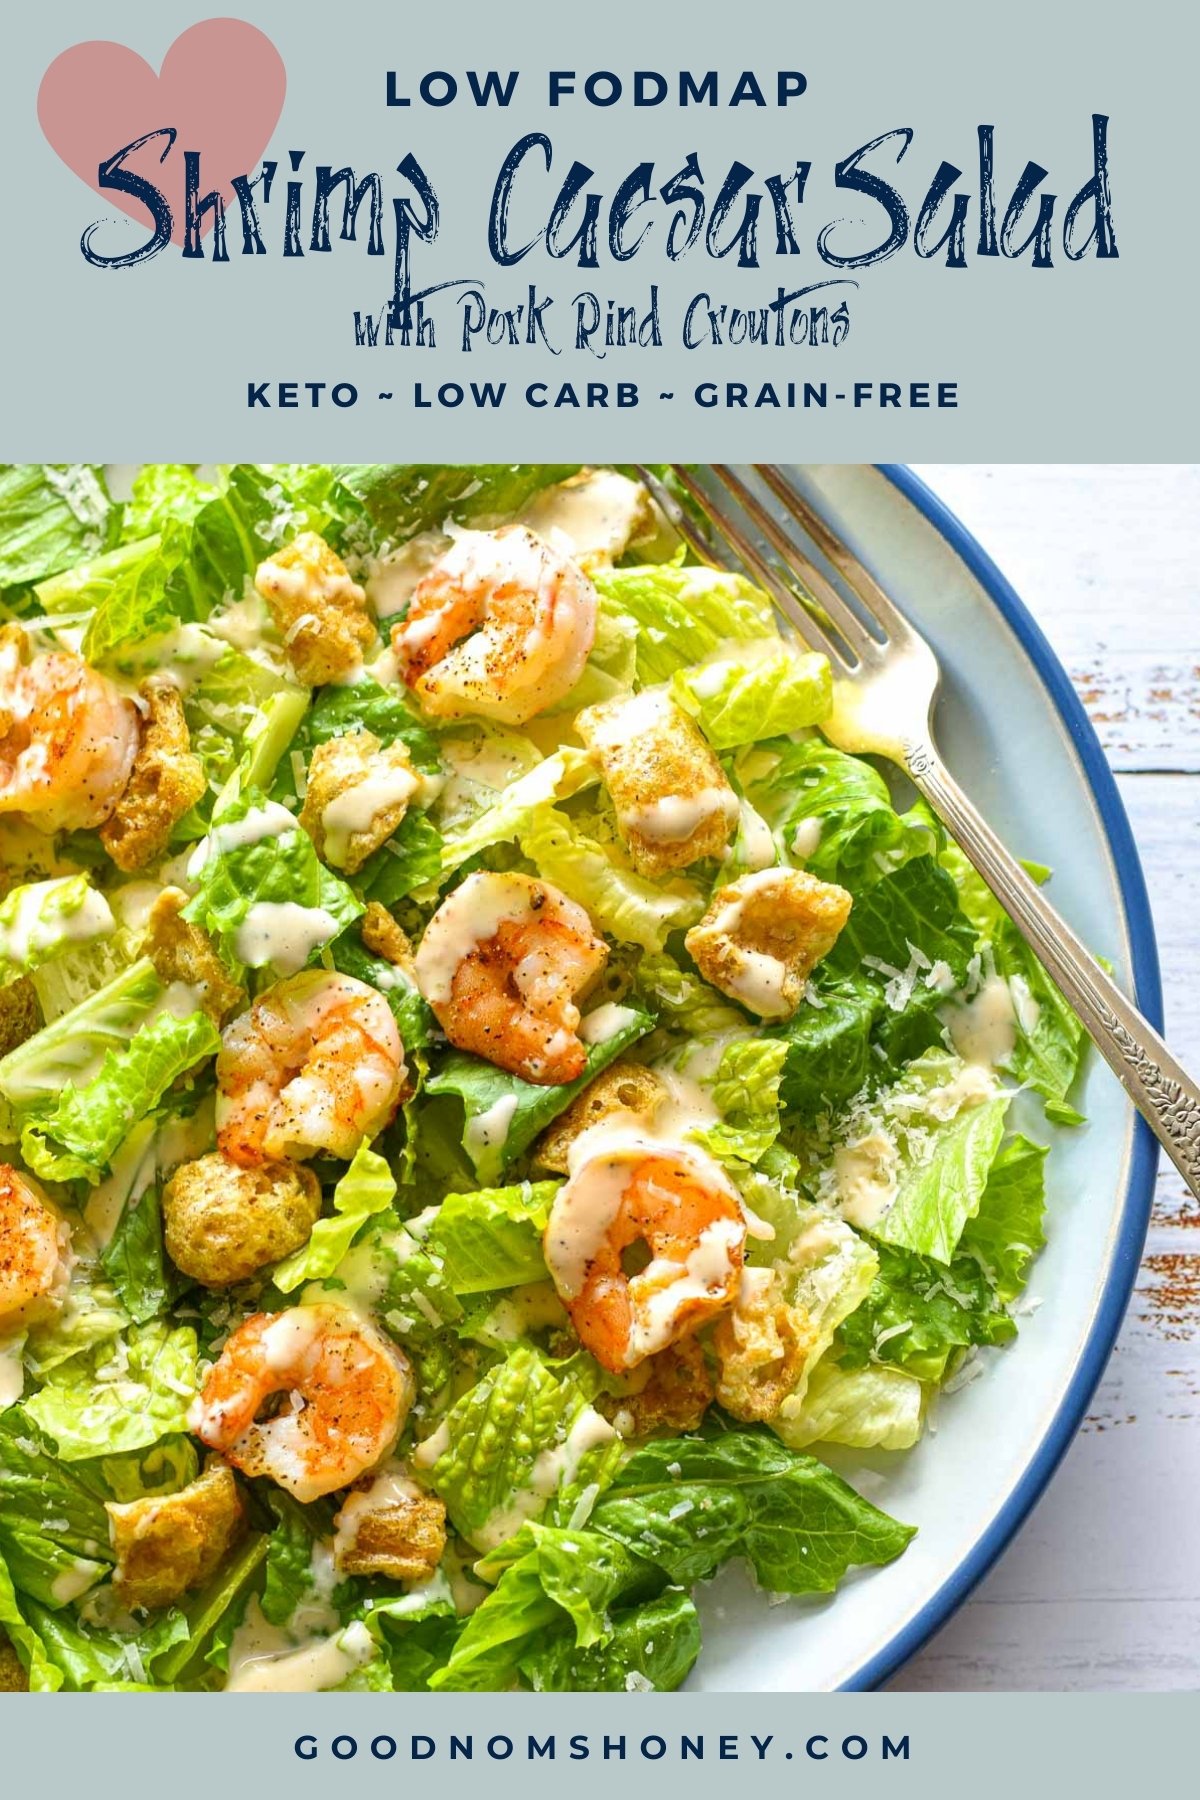 pinterest image with low fodmap shrimp caesar salad with pork rind croutons keto low carb grain-free at the top and goodnomshoney.com at the bottom